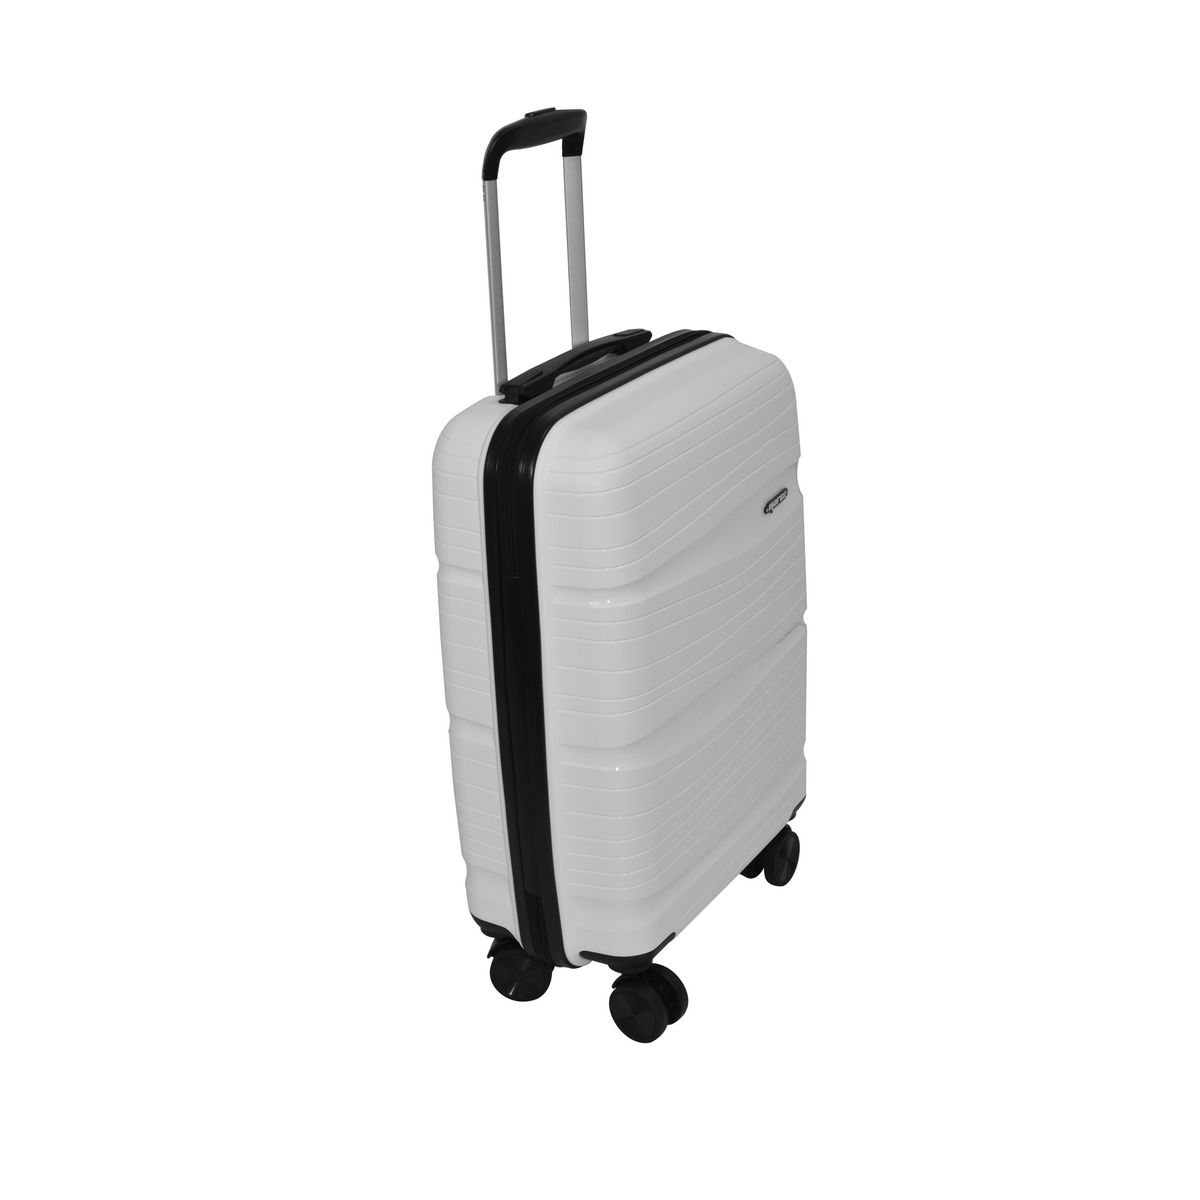 Marco Odyssey Light & Strong Polypropylene 20-inch Luggage Bag - White